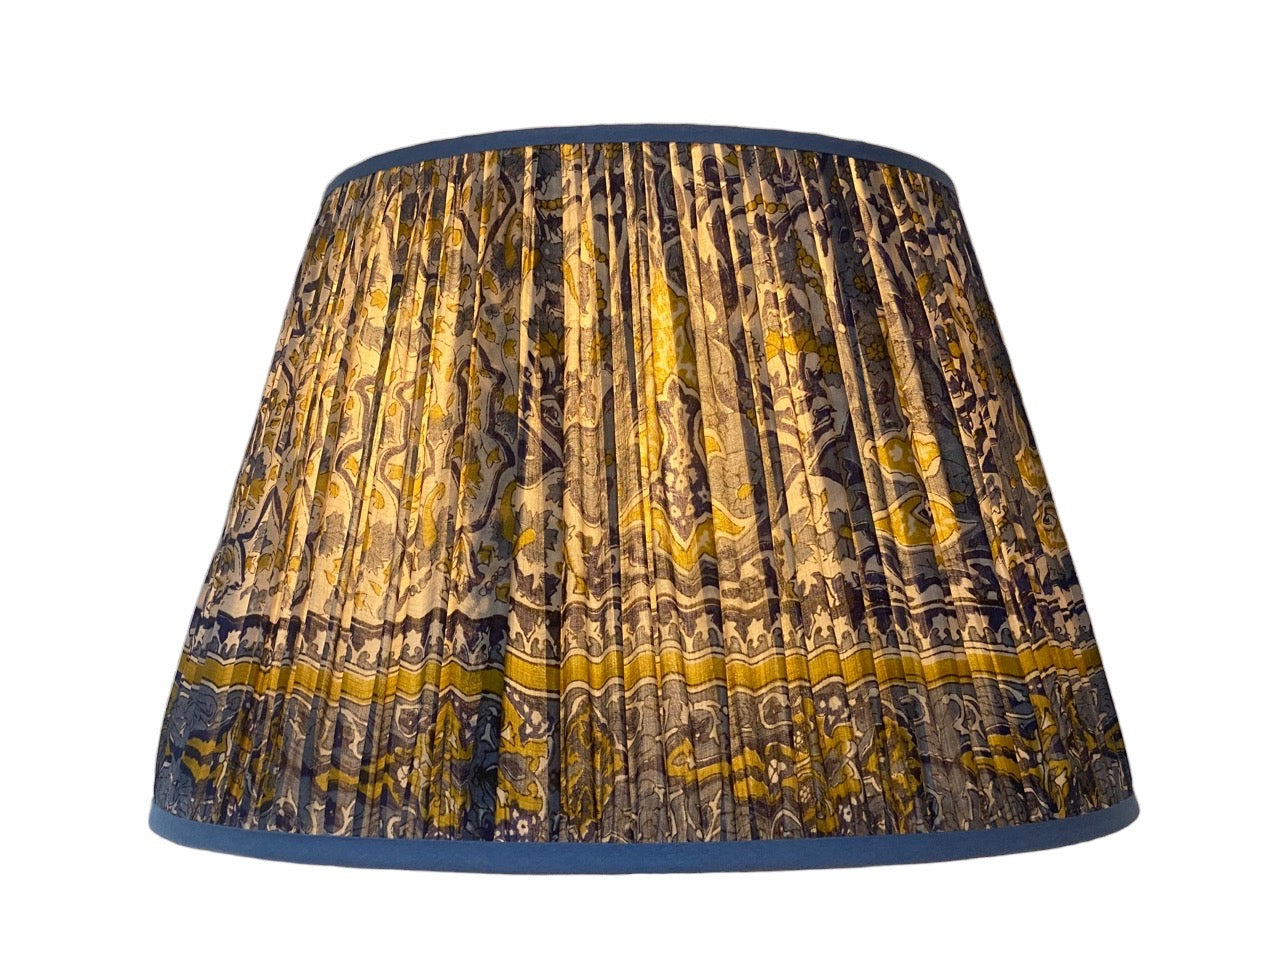 blue and yellow silk lampshade lit